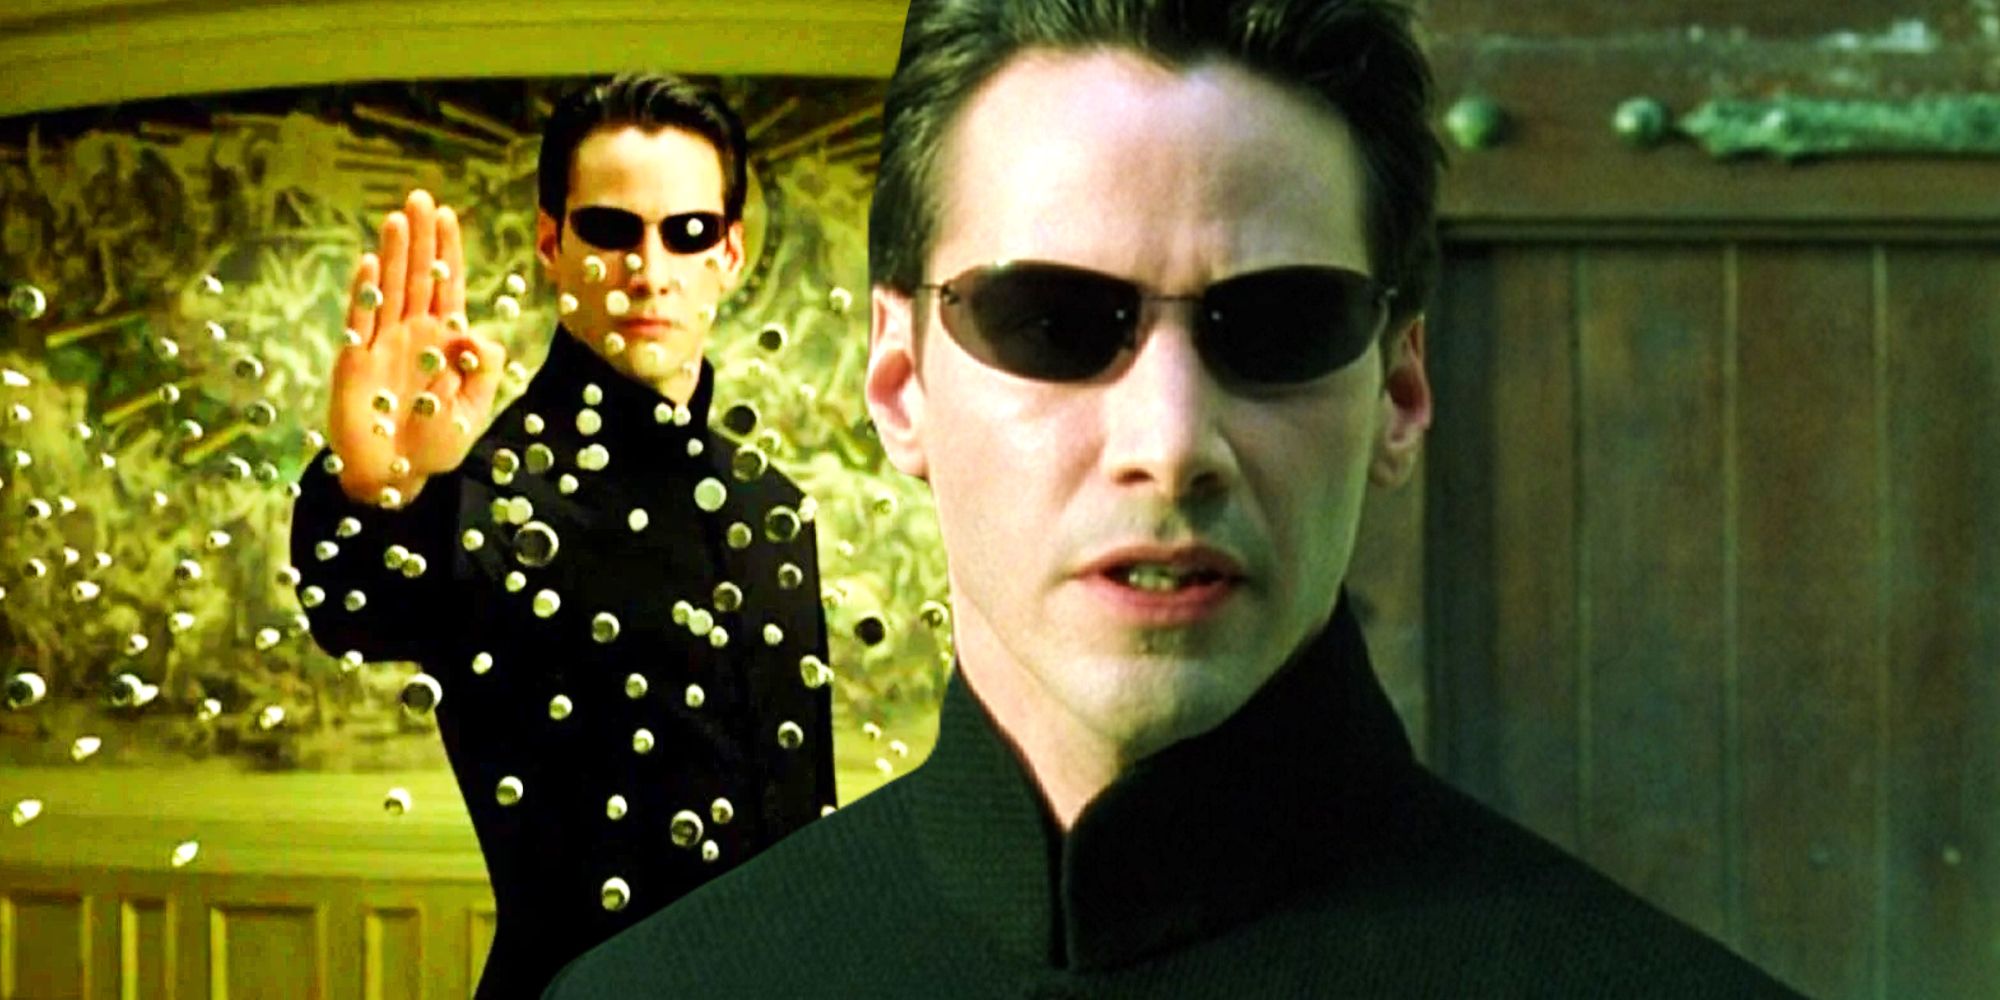 Keanu Reeves as Neo in the Matrix movies